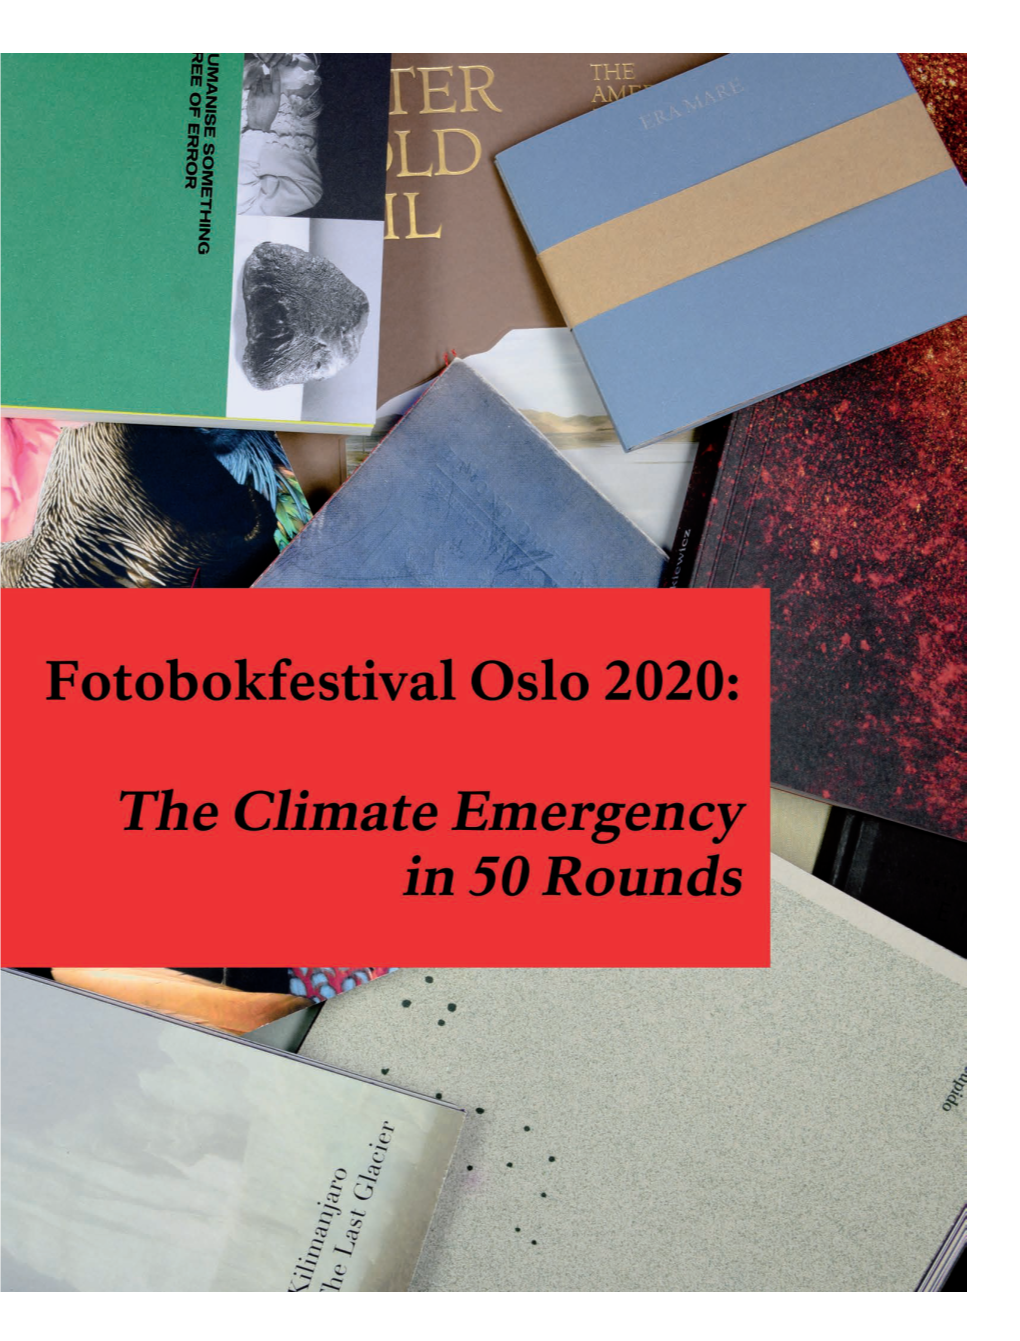 The Climate Emergency in 50 Rounds